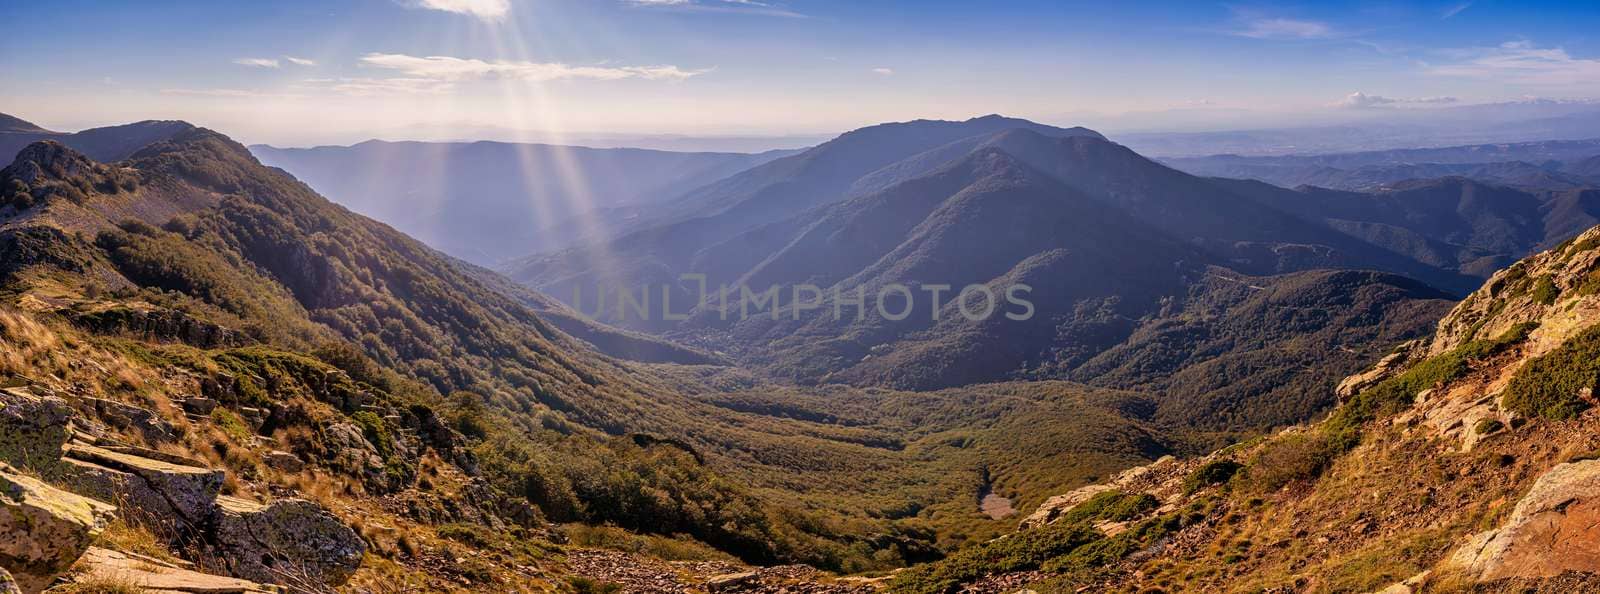 Sunset light over the mountain Montseny in Spain (pike LesAgudes)